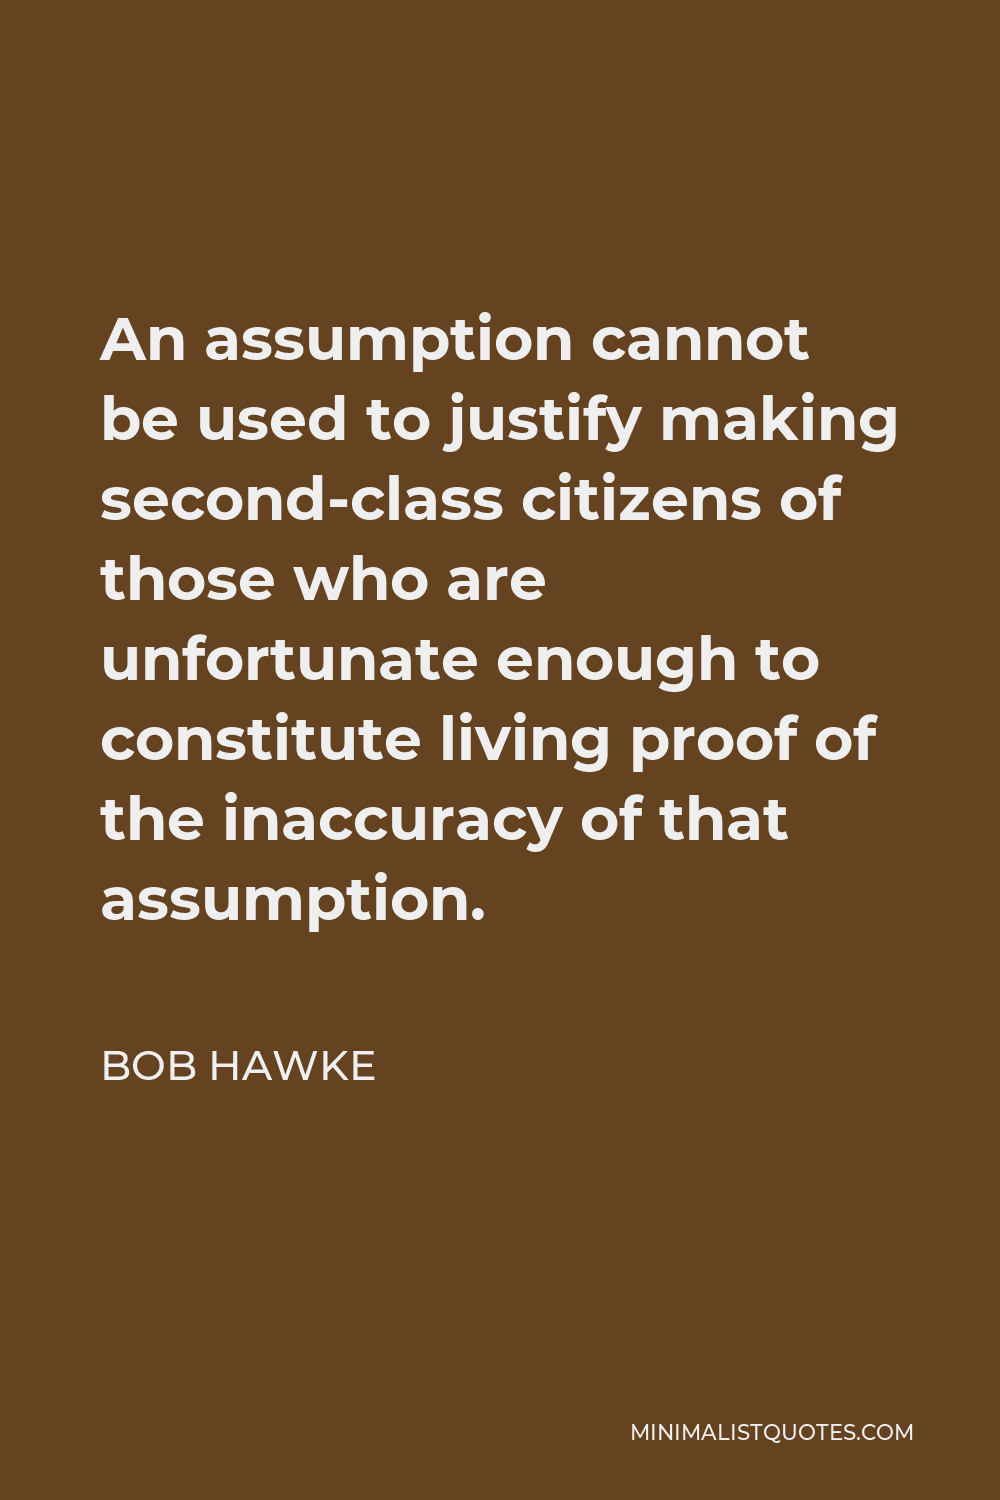 Bob Hawke Quote - An assumption cannot be used to justify making second-class citizens of those who are unfortunate enough to constitute living proof of the inaccuracy of that assumption.